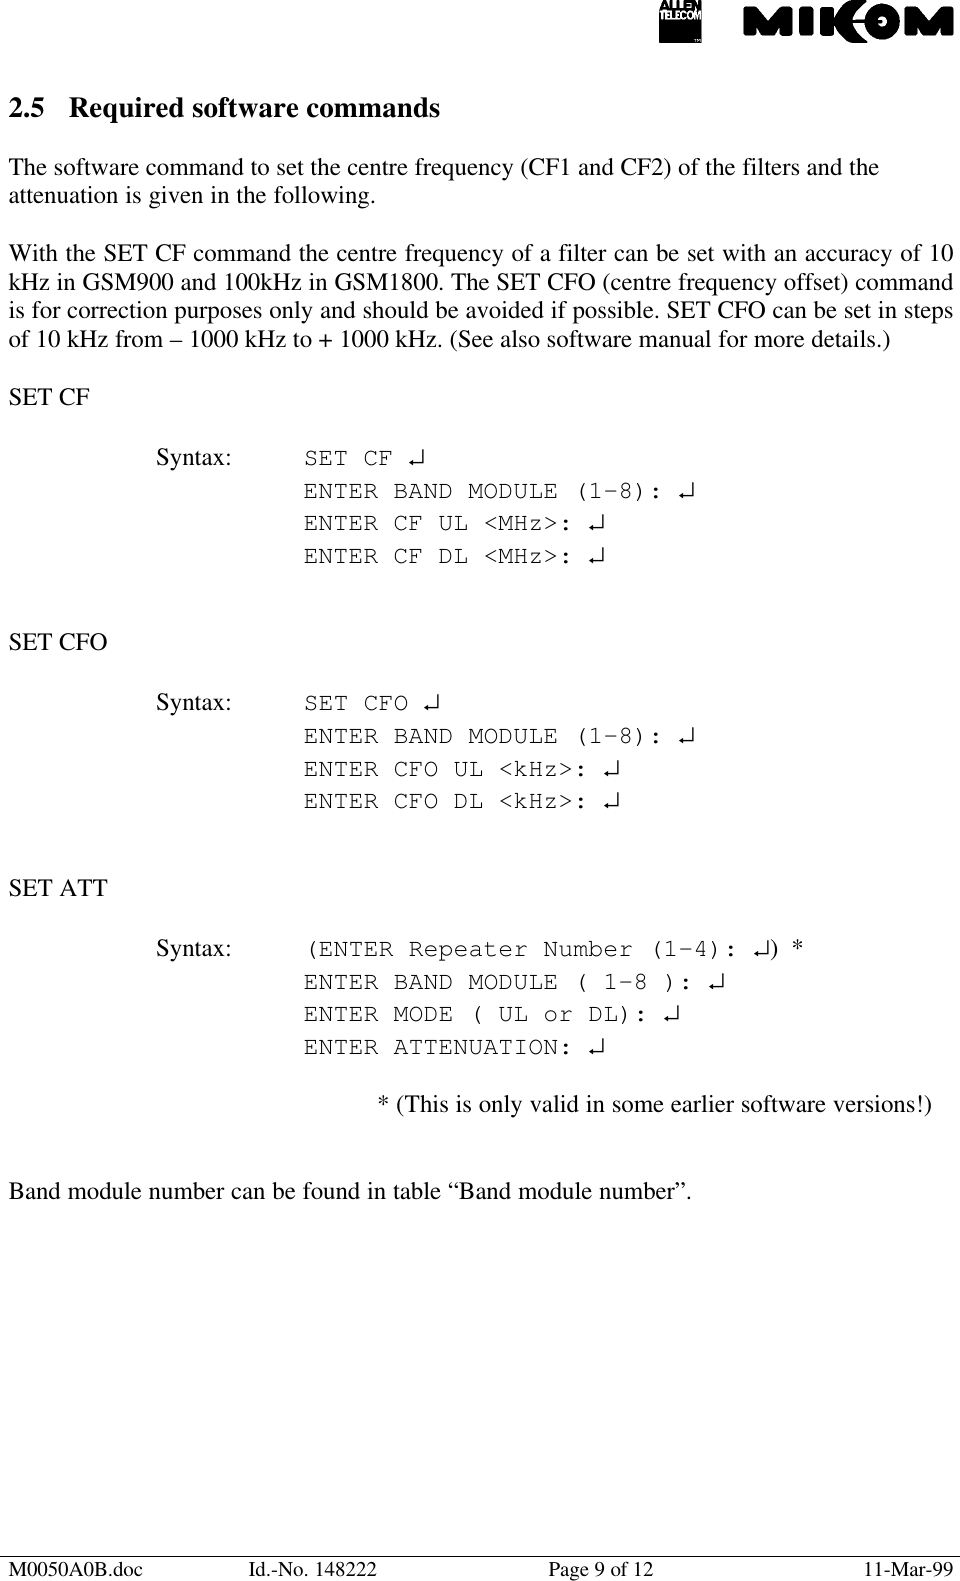 M0050A0B.doc Id.-No. 148222 Page 9 of 12 11-Mar-992.5 Required software commandsThe software command to set the centre frequency (CF1 and CF2) of the filters and theattenuation is given in the following.With the SET CF command the centre frequency of a filter can be set with an accuracy of 10kHz in GSM900 and 100kHz in GSM1800. The SET CFO (centre frequency offset) commandis for correction purposes only and should be avoided if possible. SET CFO can be set in stepsof 10 kHz from – 1000 kHz to + 1000 kHz. (See also software manual for more details.)SET CFSyntax: SET CF ↵ENTER BAND MODULE (1-8): ↵ENTER CF UL &lt;MHz&gt;: ↵ENTER CF DL &lt;MHz&gt;: ↵SET CFOSyntax: SET CFO ↵ENTER BAND MODULE (1-8): ↵ENTER CFO UL &lt;kHz&gt;: ↵ENTER CFO DL &lt;kHz&gt;: ↵SET ATTSyntax: (ENTER Repeater Number (1-4): ↵)  *ENTER BAND MODULE ( 1-8 ): ↵ENTER MODE ( UL or DL): ↵ENTER ATTENUATION: ↵* (This is only valid in some earlier software versions!)Band module number can be found in table “Band module number”.